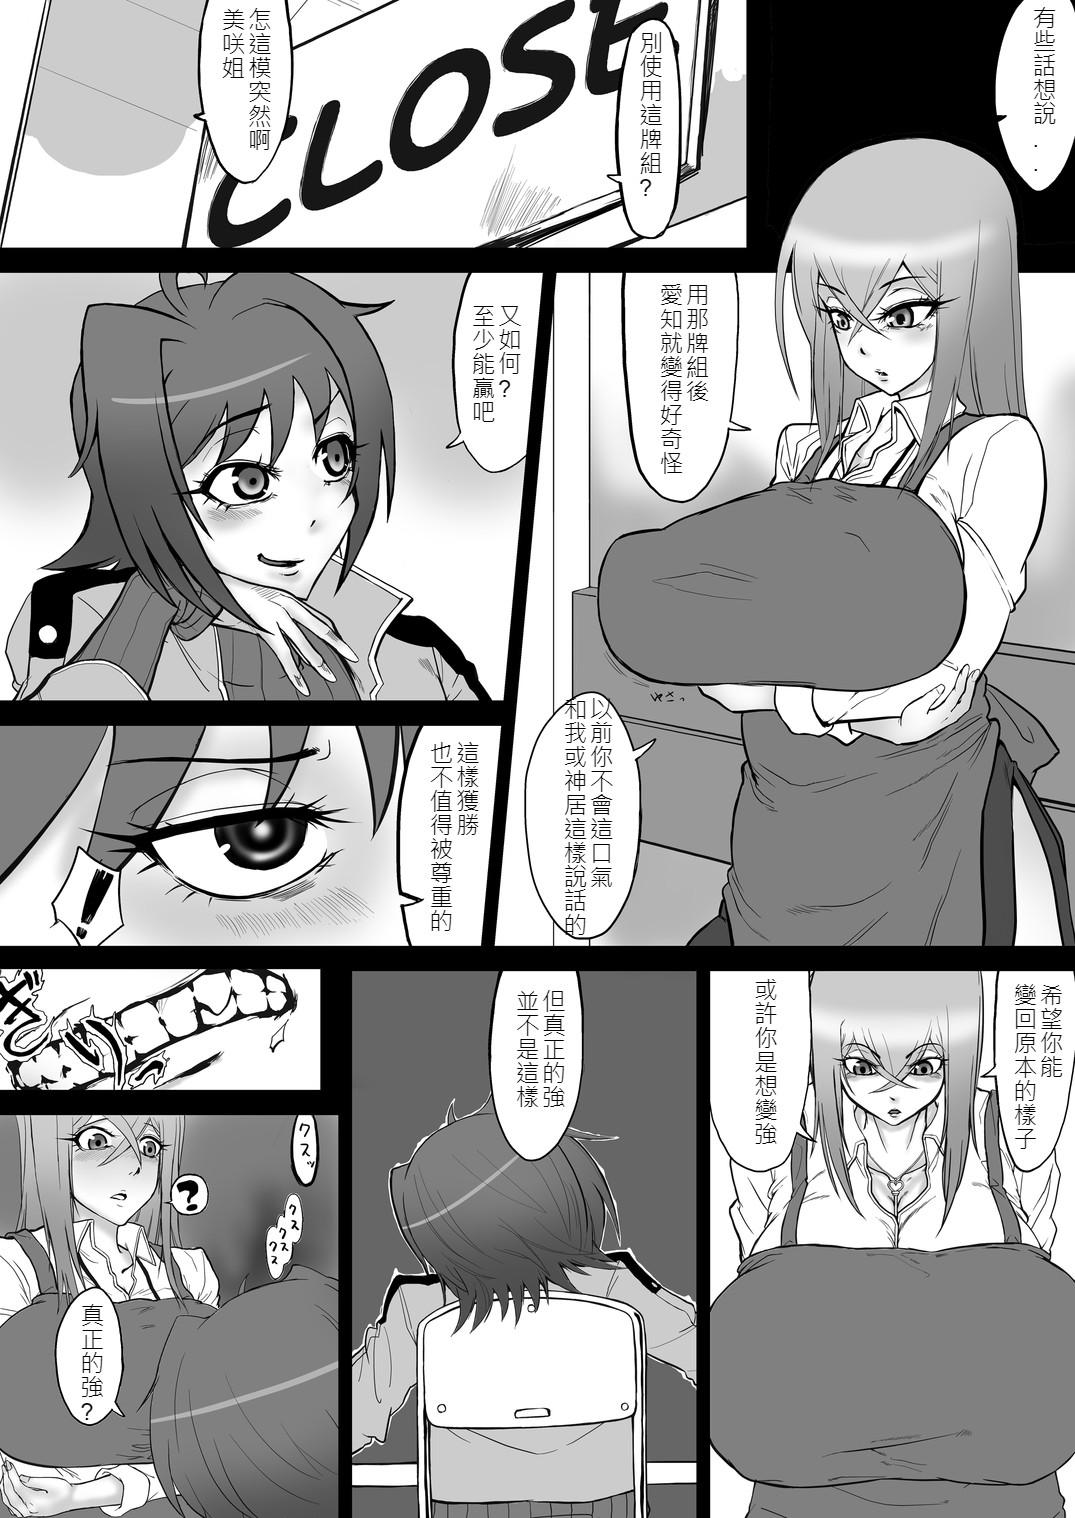 Free Amateur Bind!! - Cardfight vanguard Tanned - Page 5